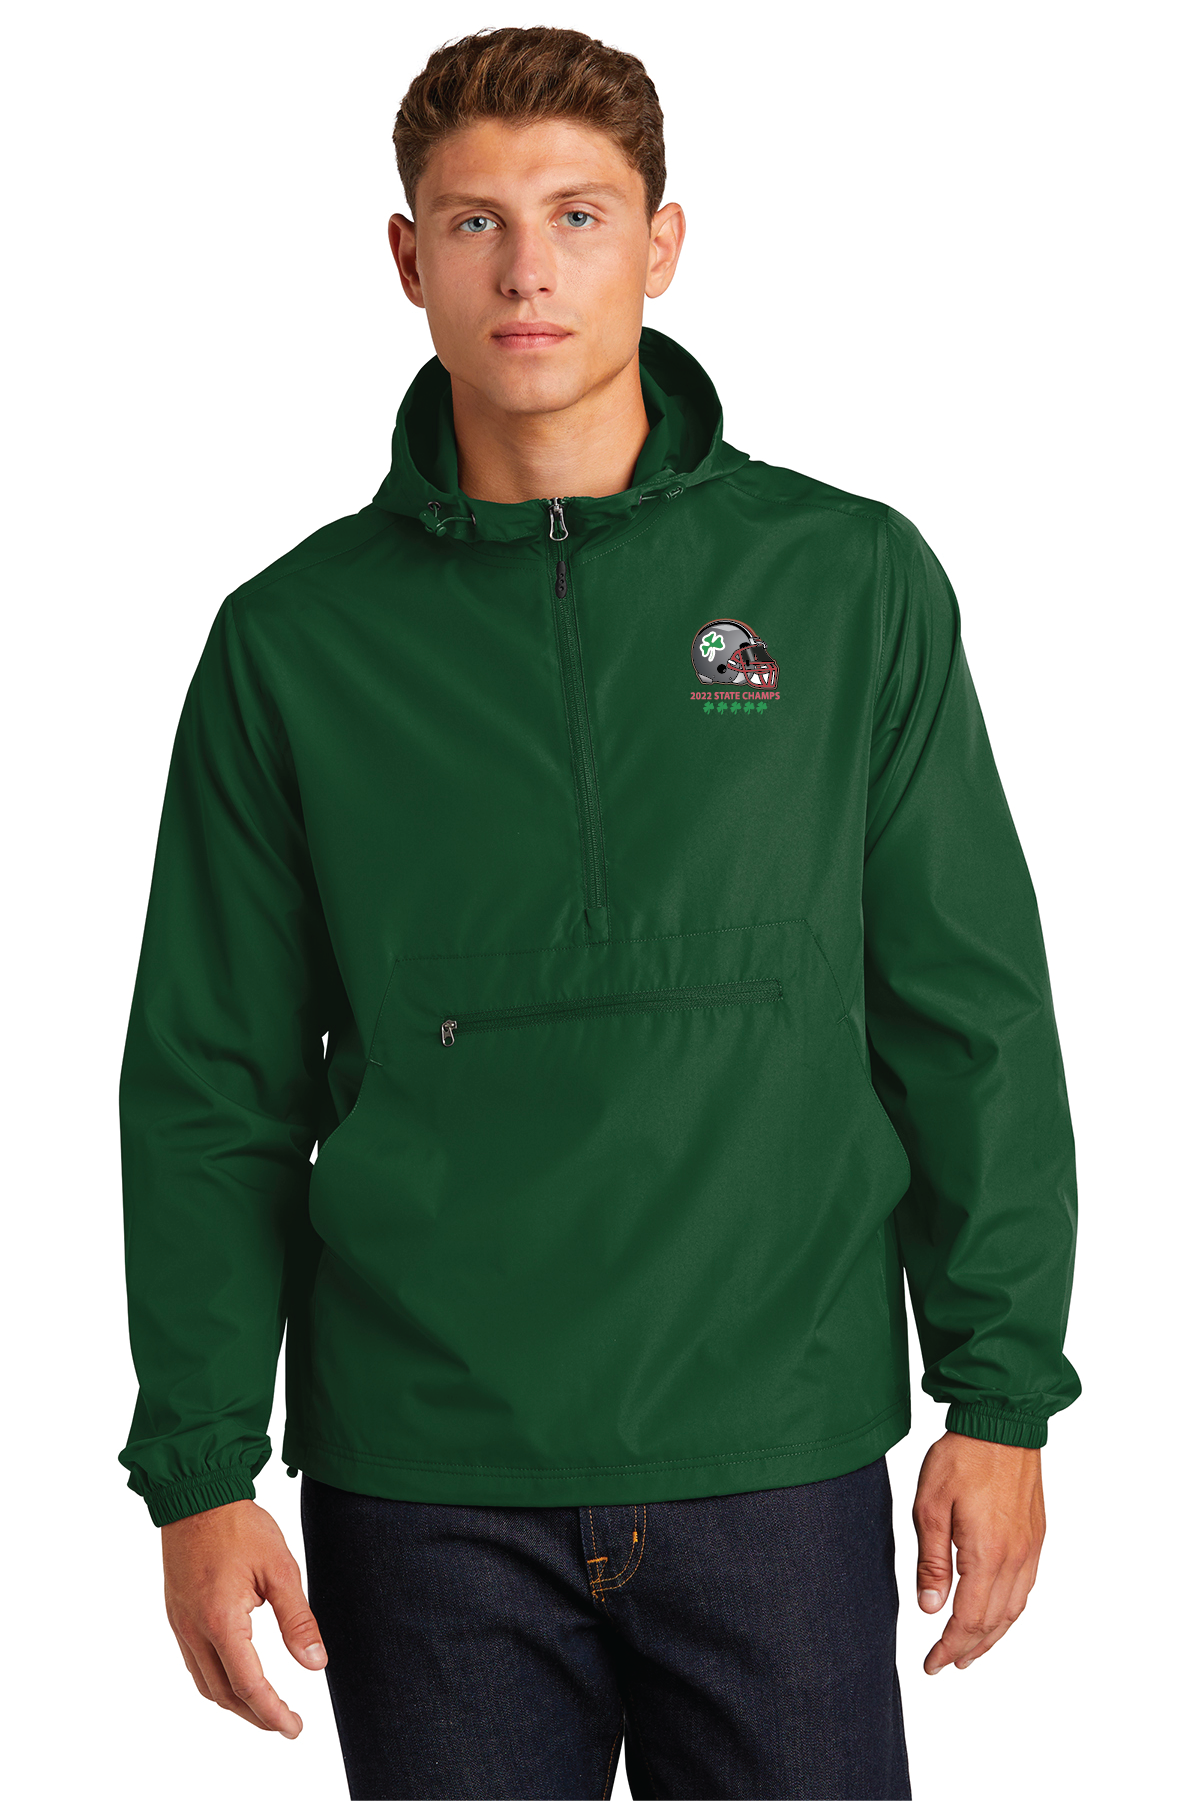 2022 STATE CHAMPS Sport-Tek Packable Anorak